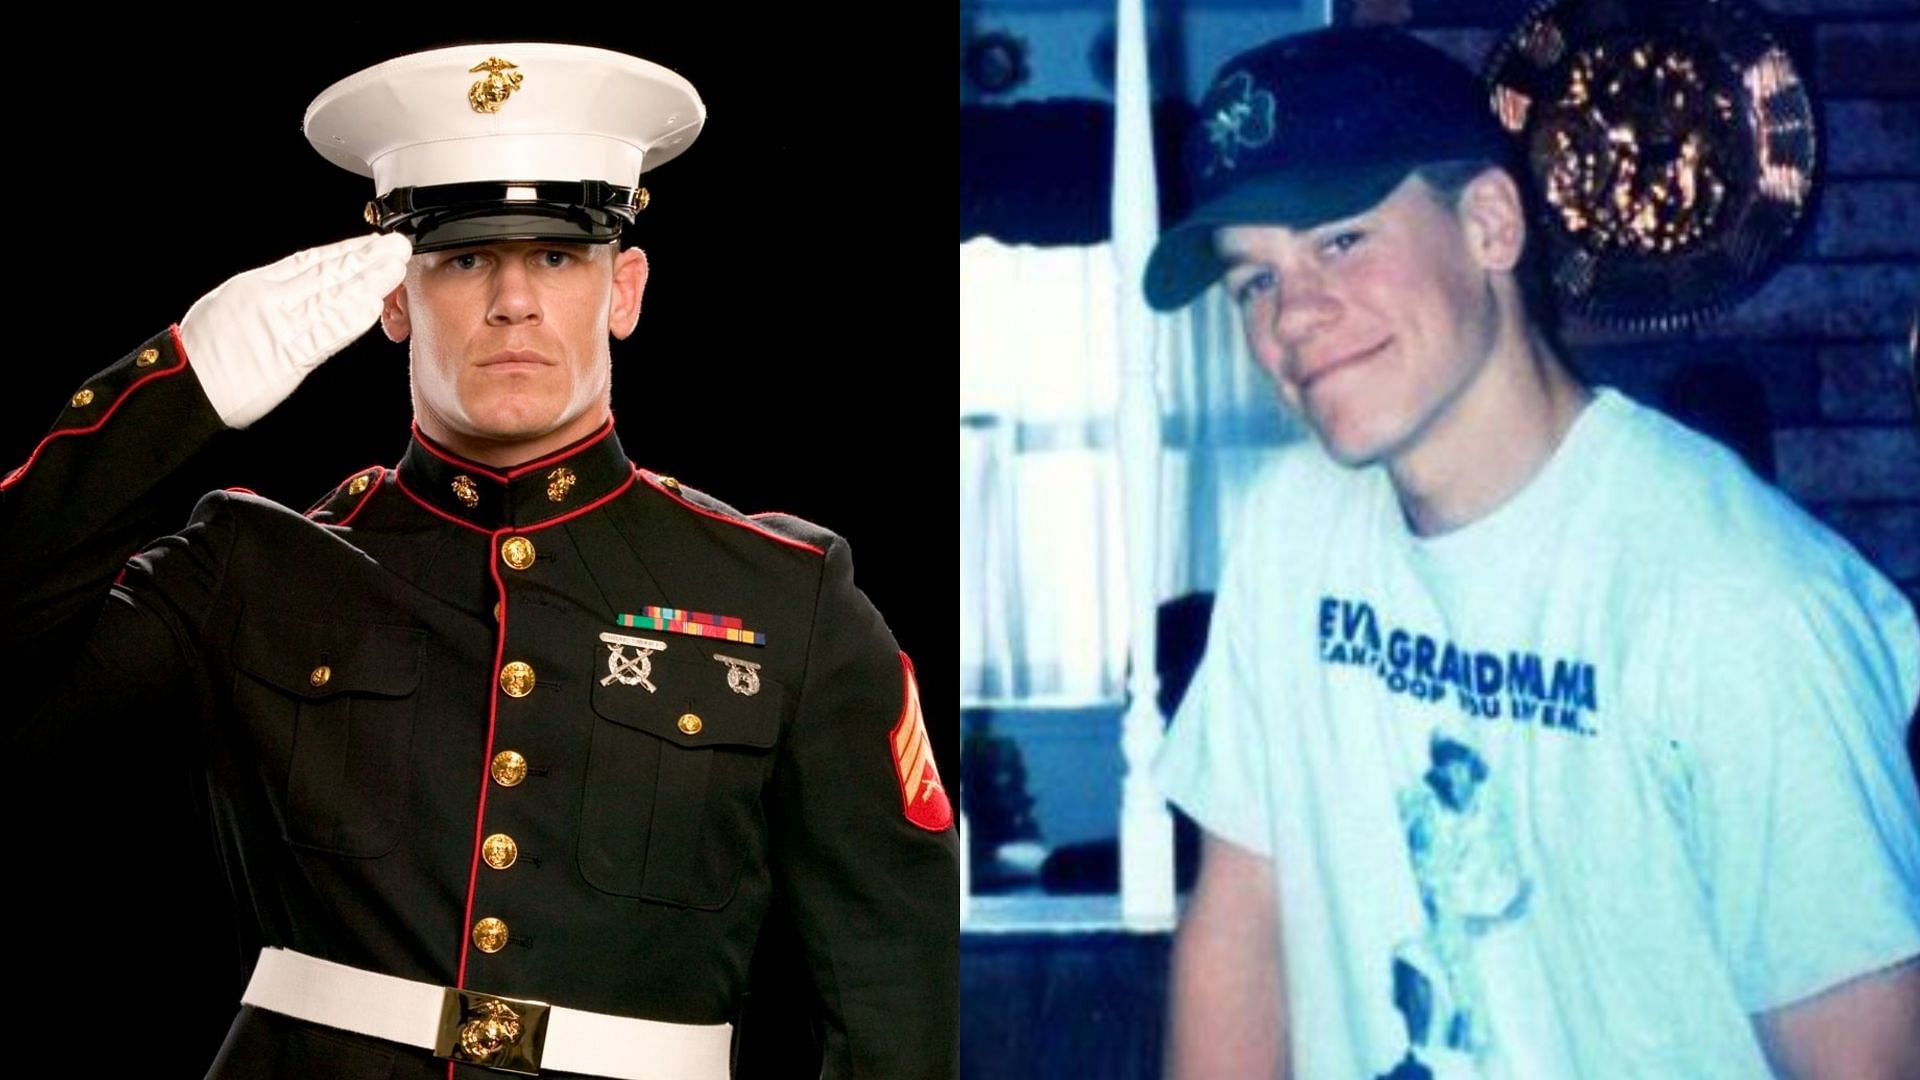 John Cena kicked off his acting career in 2006, starring in The Marine